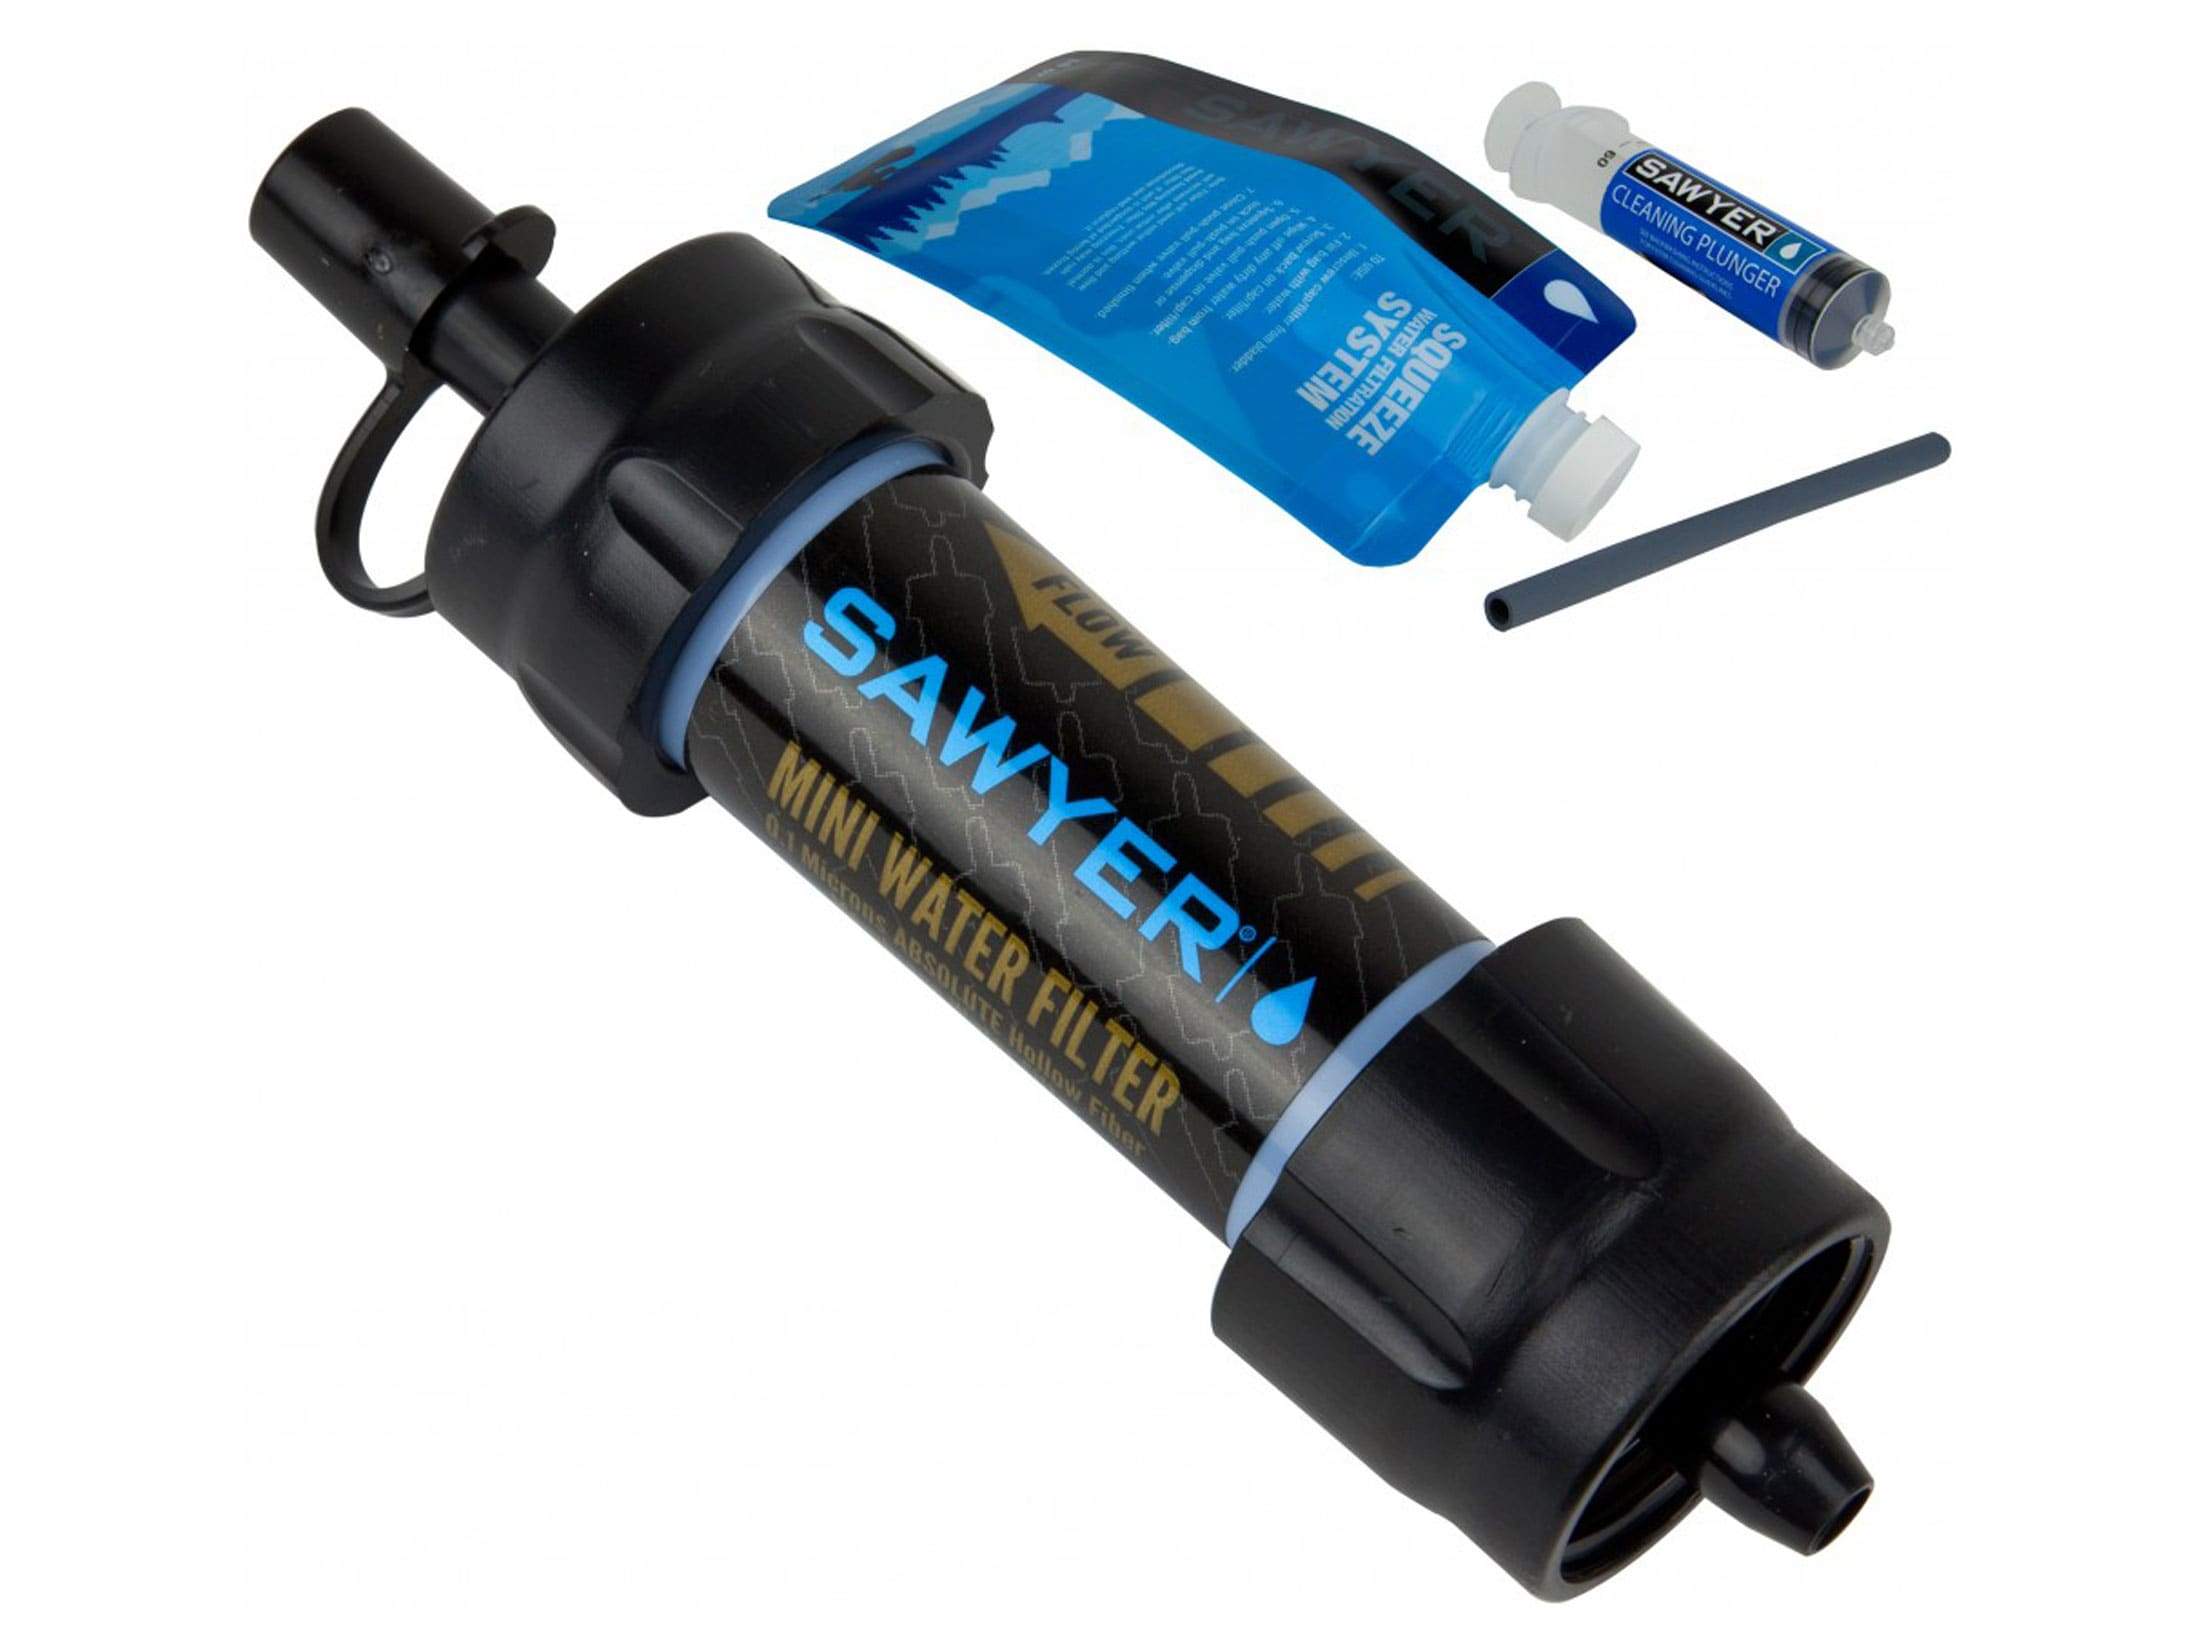 Sawyer Mini Water Filtration System - Ascent Outdoors LLC